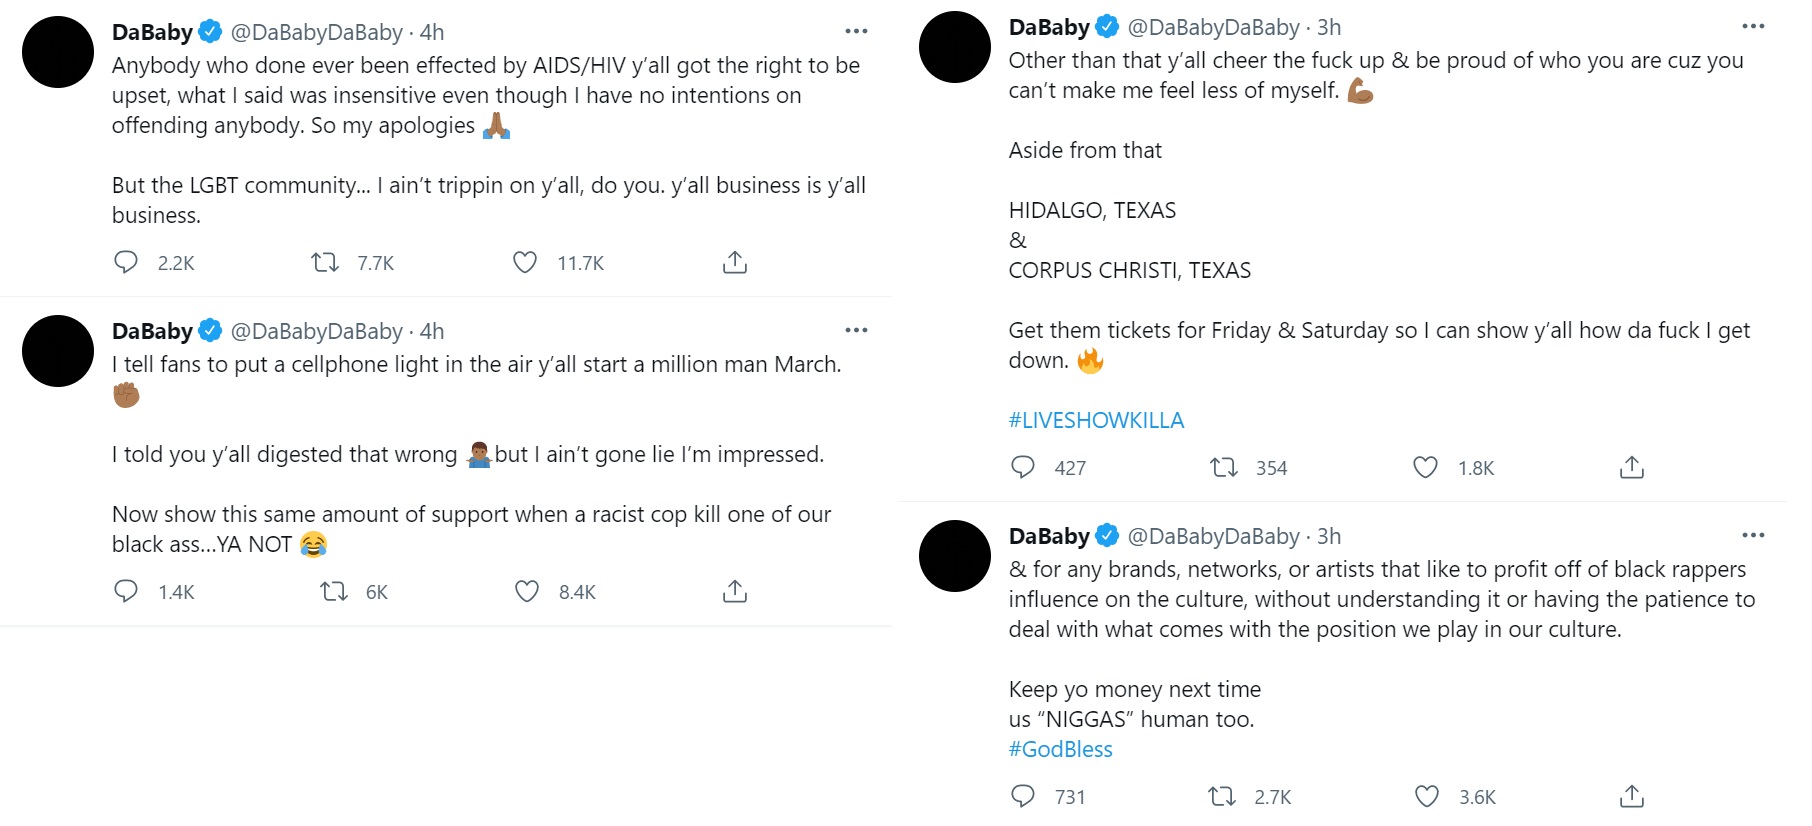 DaBaby apologizes to the LGBTQ community but doesn't take back what he said